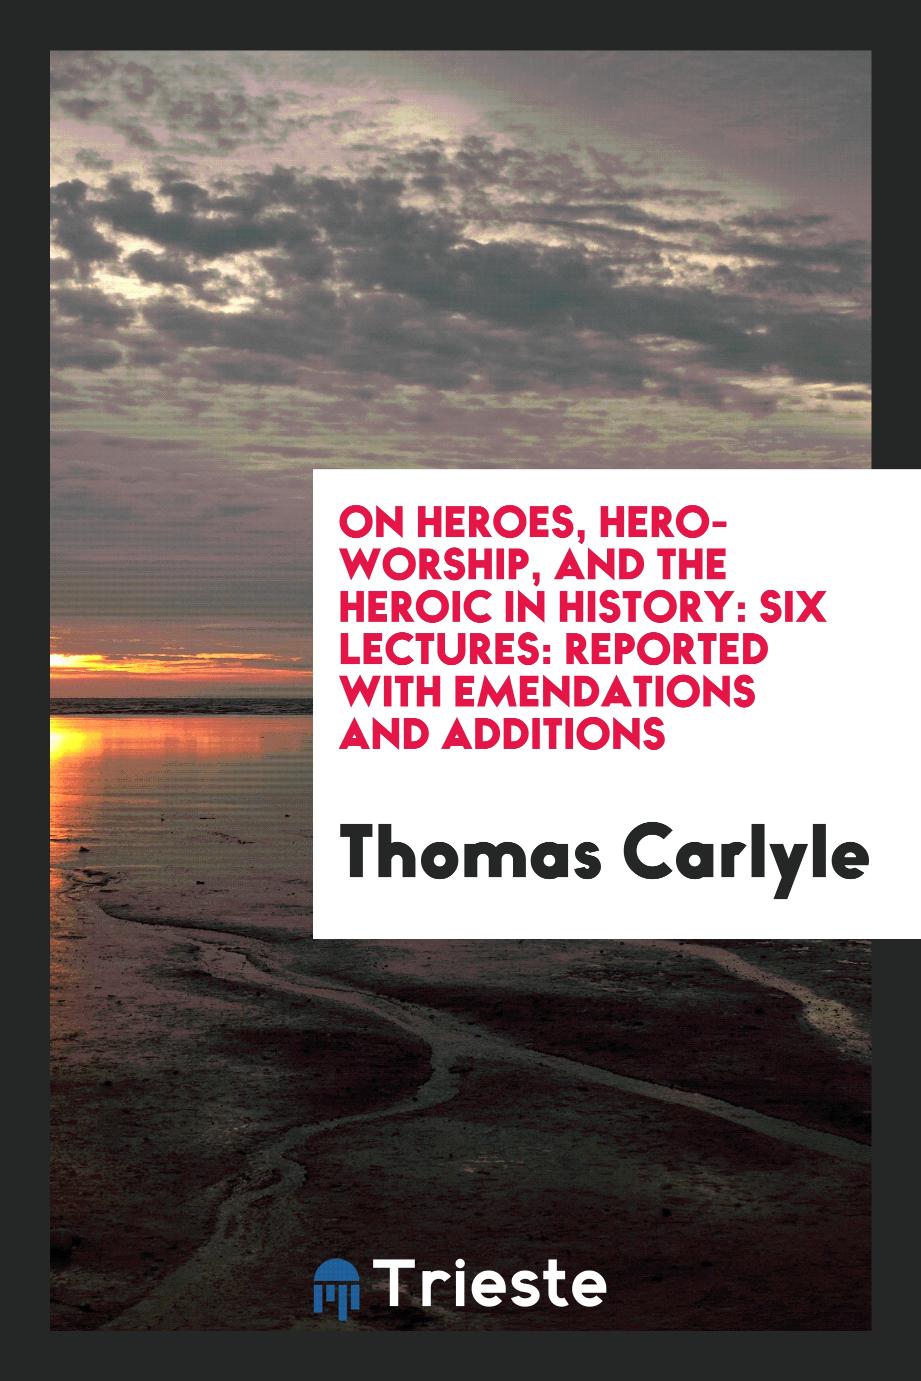 On Heroes, Hero-Worship, and the Heroic in History: Six Lectures: Reported with Emendations and Additions